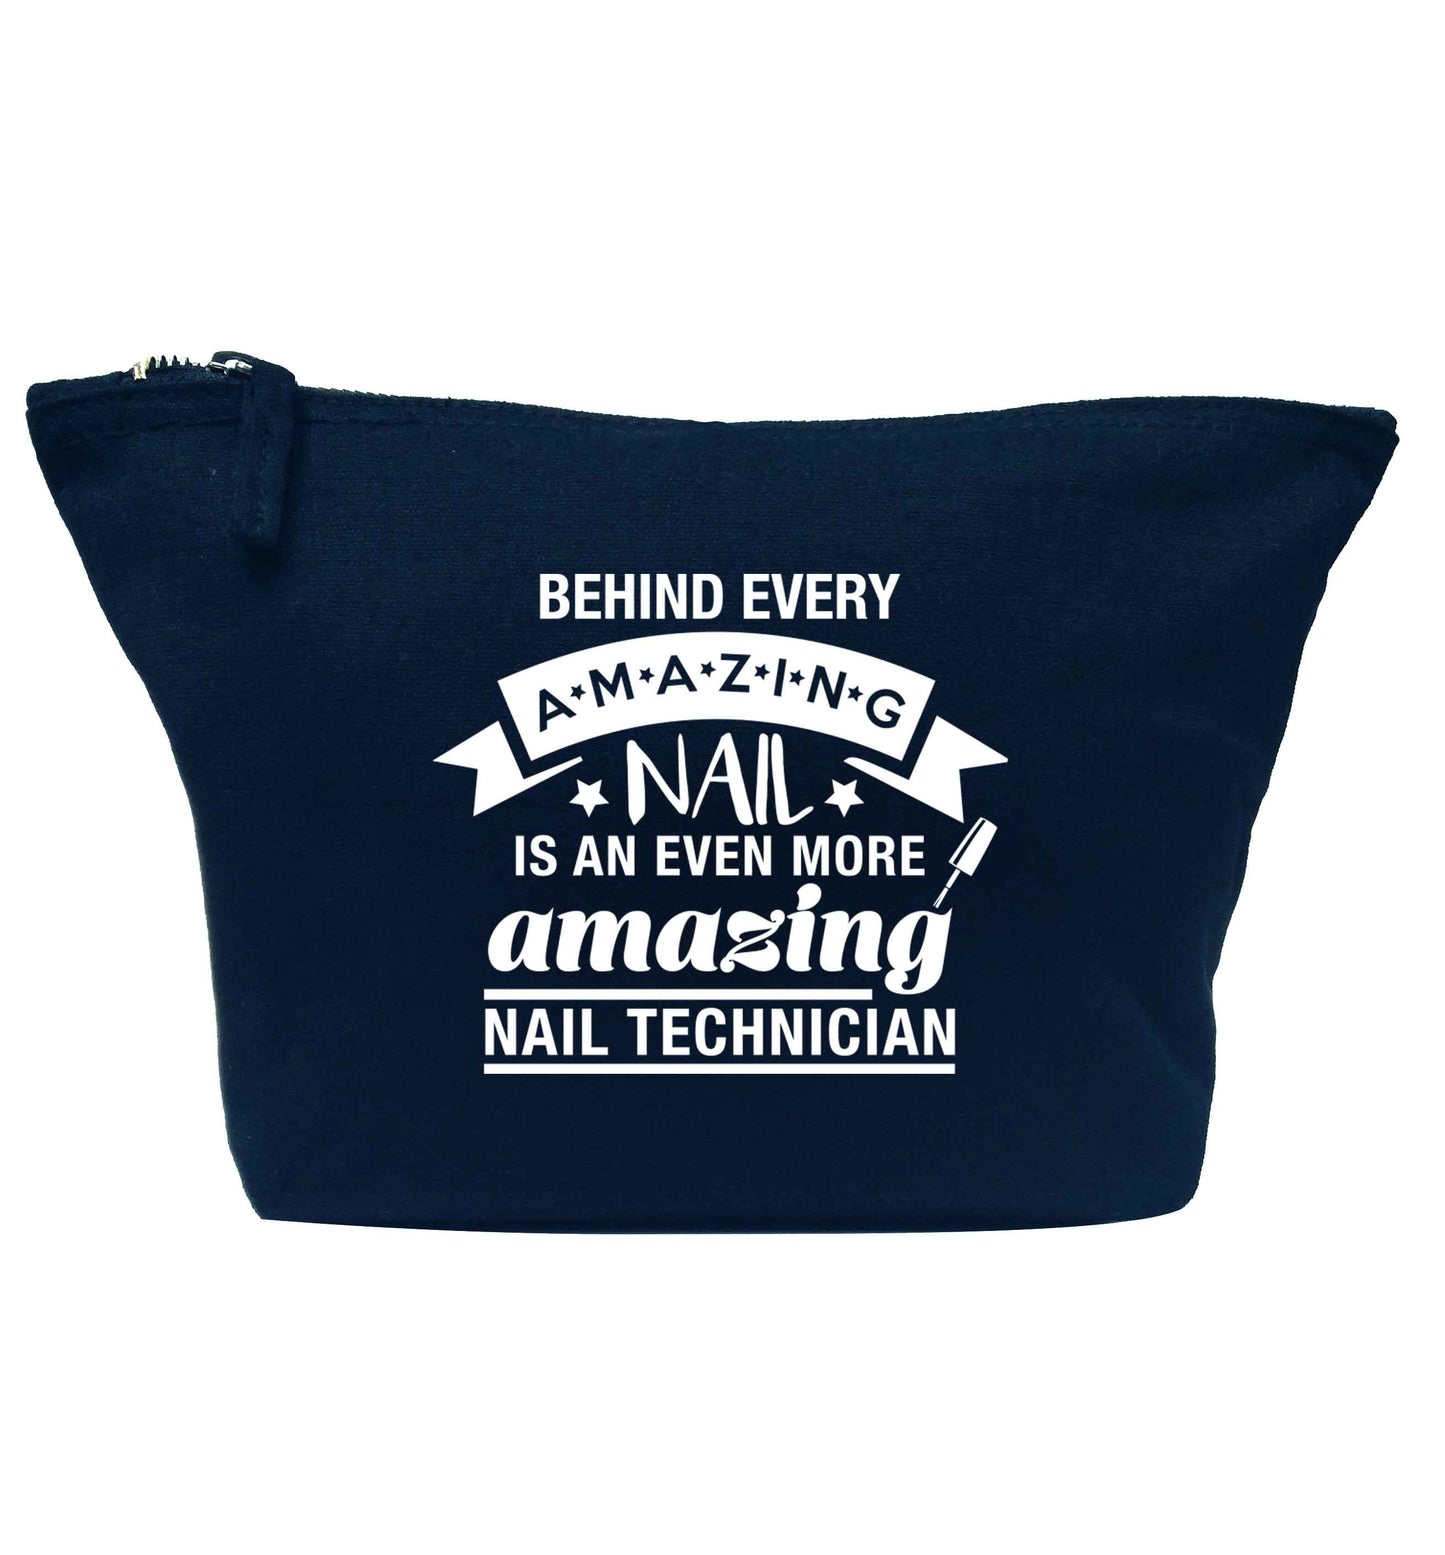 Behind every amazing nail is an even more amazing nail technician navy makeup bag